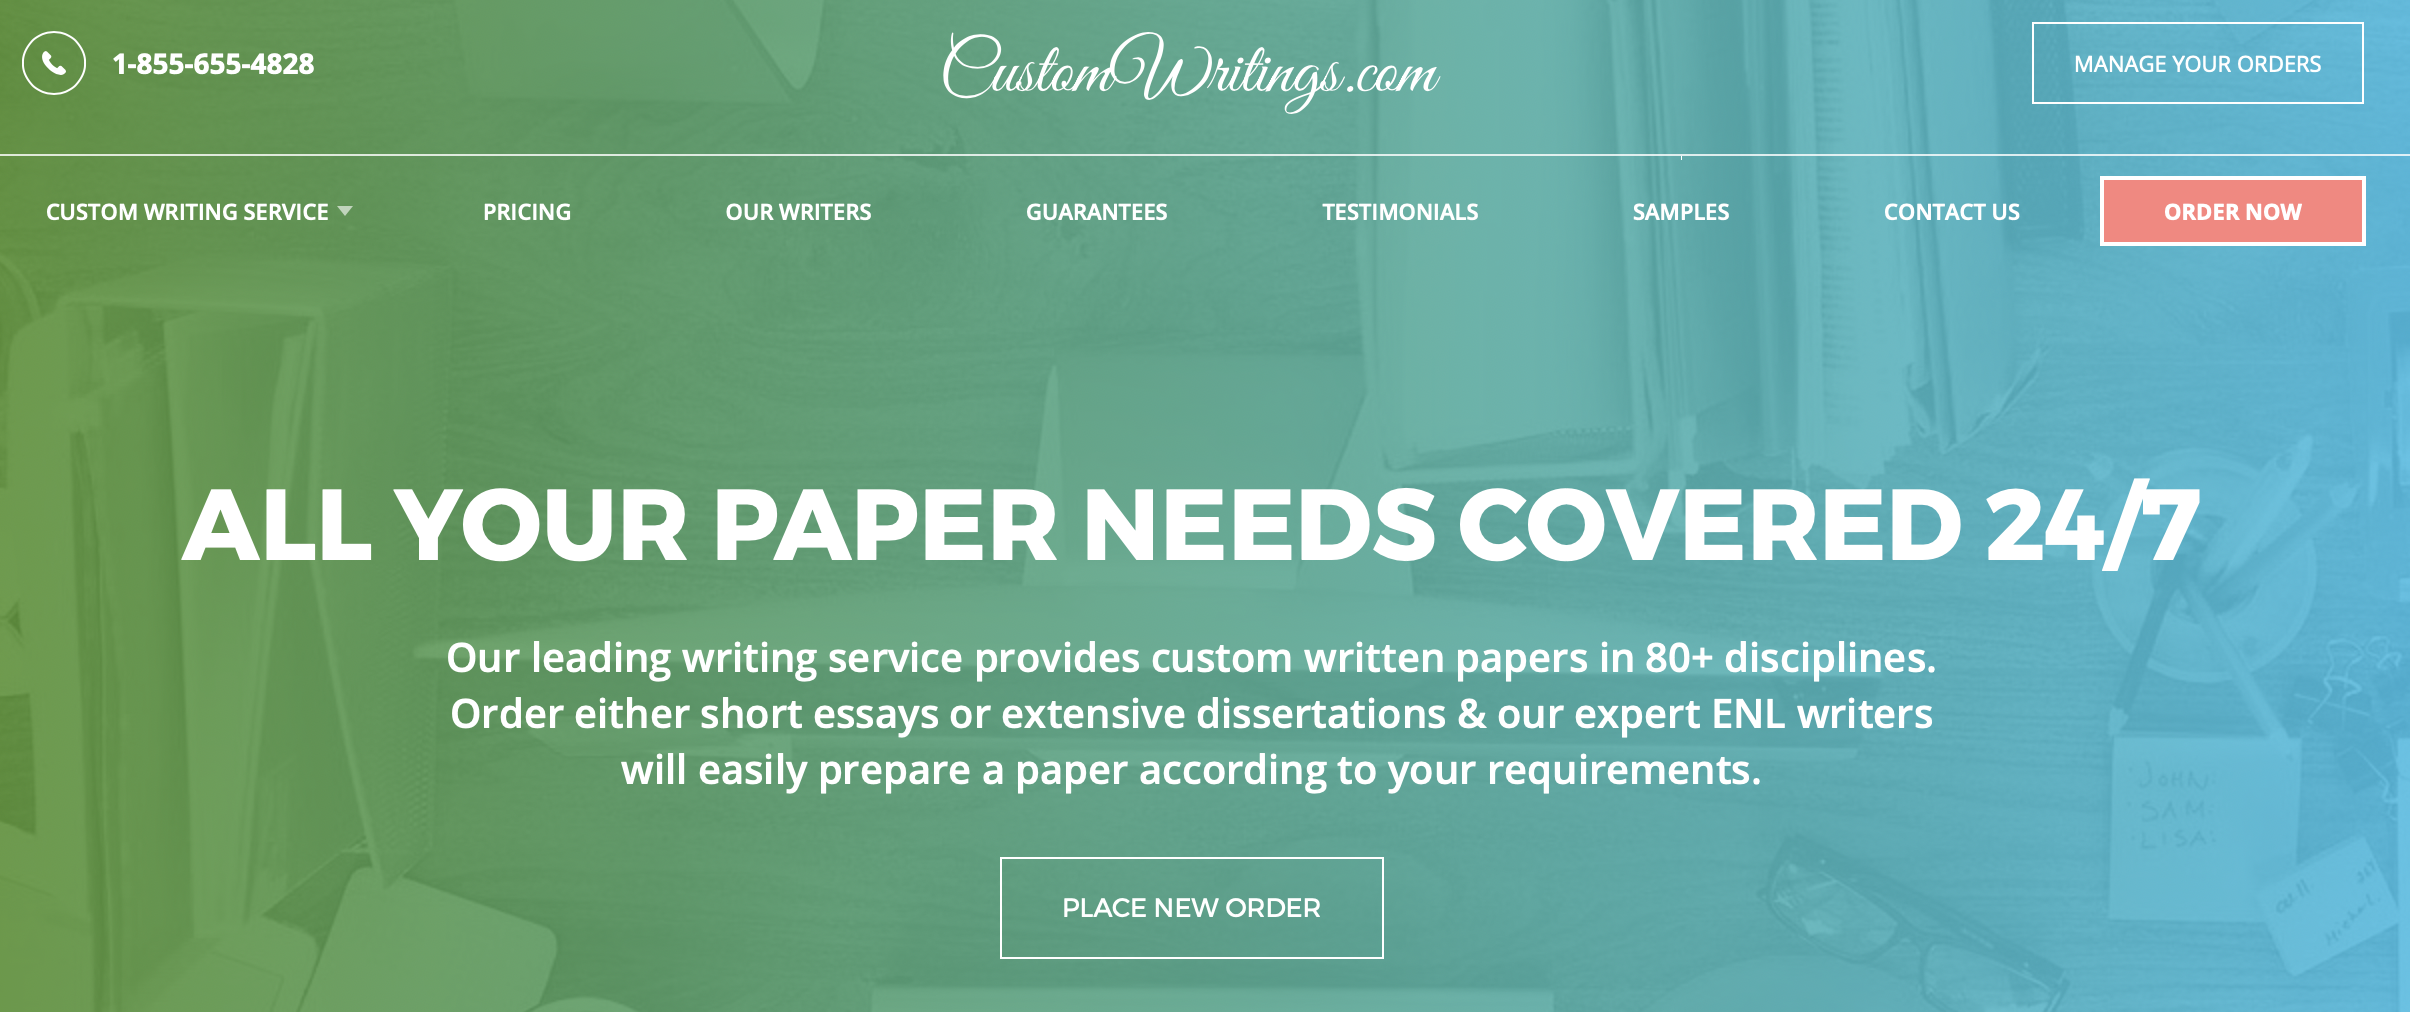 Writing services online